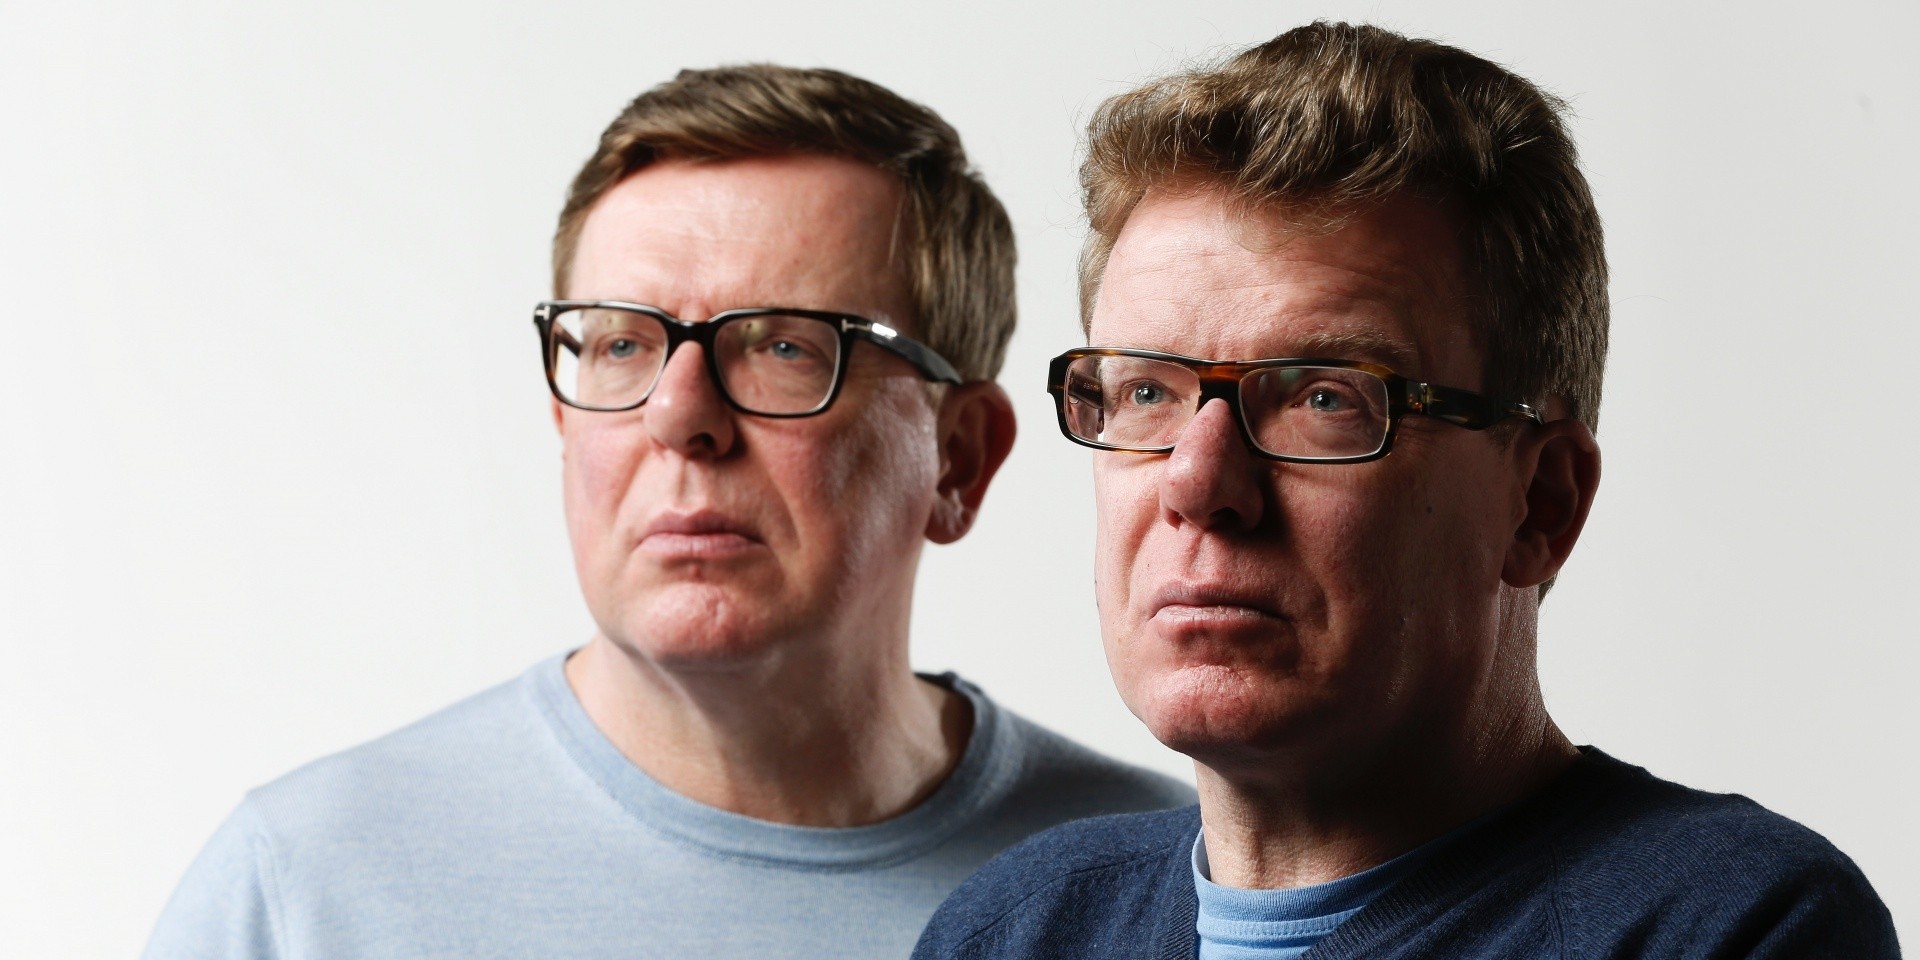 "We get more out of playing now than we did several years ago": An interview with The Proclaimers